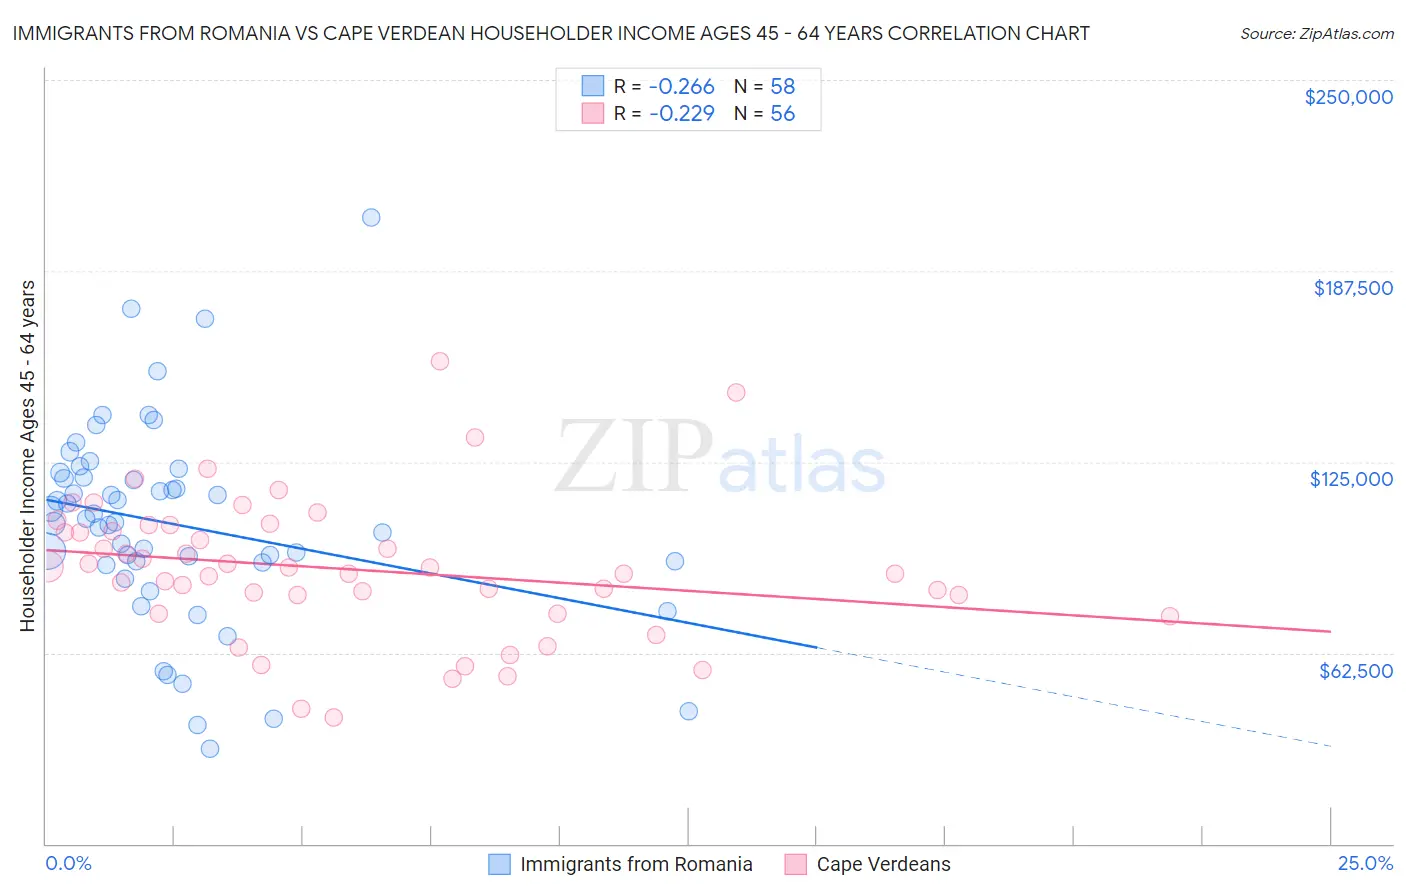 Immigrants from Romania vs Cape Verdean Householder Income Ages 45 - 64 years